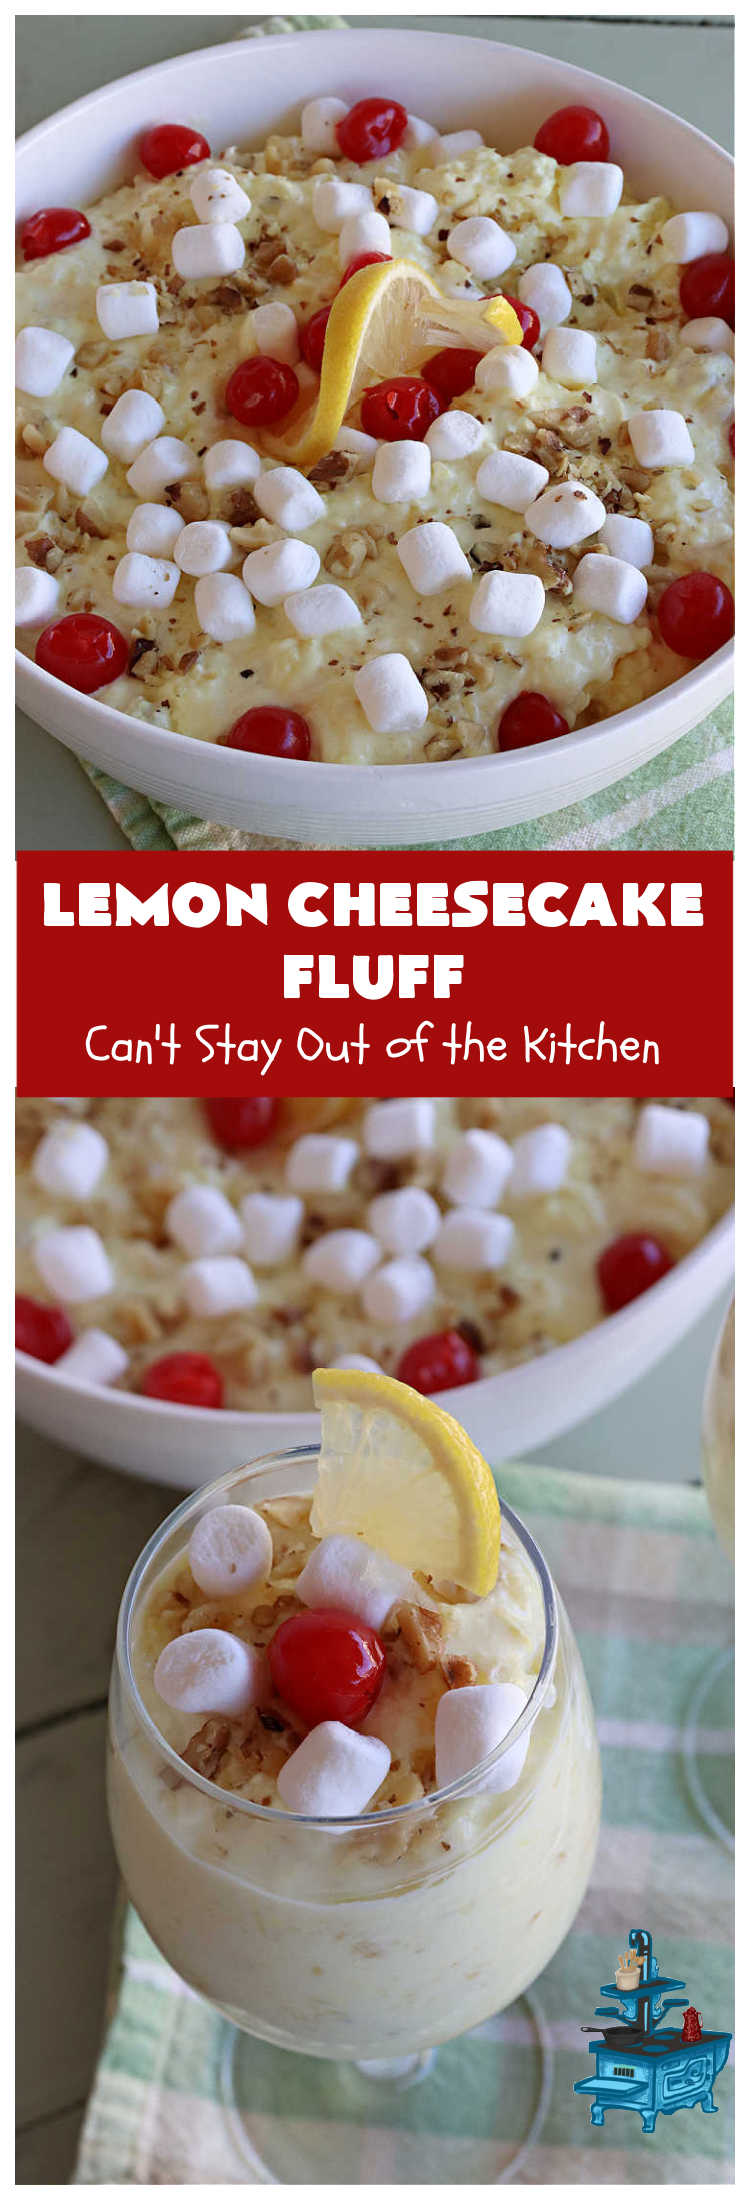 Lemon Cheesecake Fluff | Can't Stay Out of the Kitchen | this spectacular "fluff"-type #FruitSalad is terrific for company or #holiday dinners. It includes #CreamCheese, #CheesecakePuddingMix, #Lemon #JellO, miniature #marshmallows, #CoolWhip & #walnuts.Serve it in a trifle dish, glass bowl or parfait glasses for special occasions. #LemonCheesecakeFluff #salad